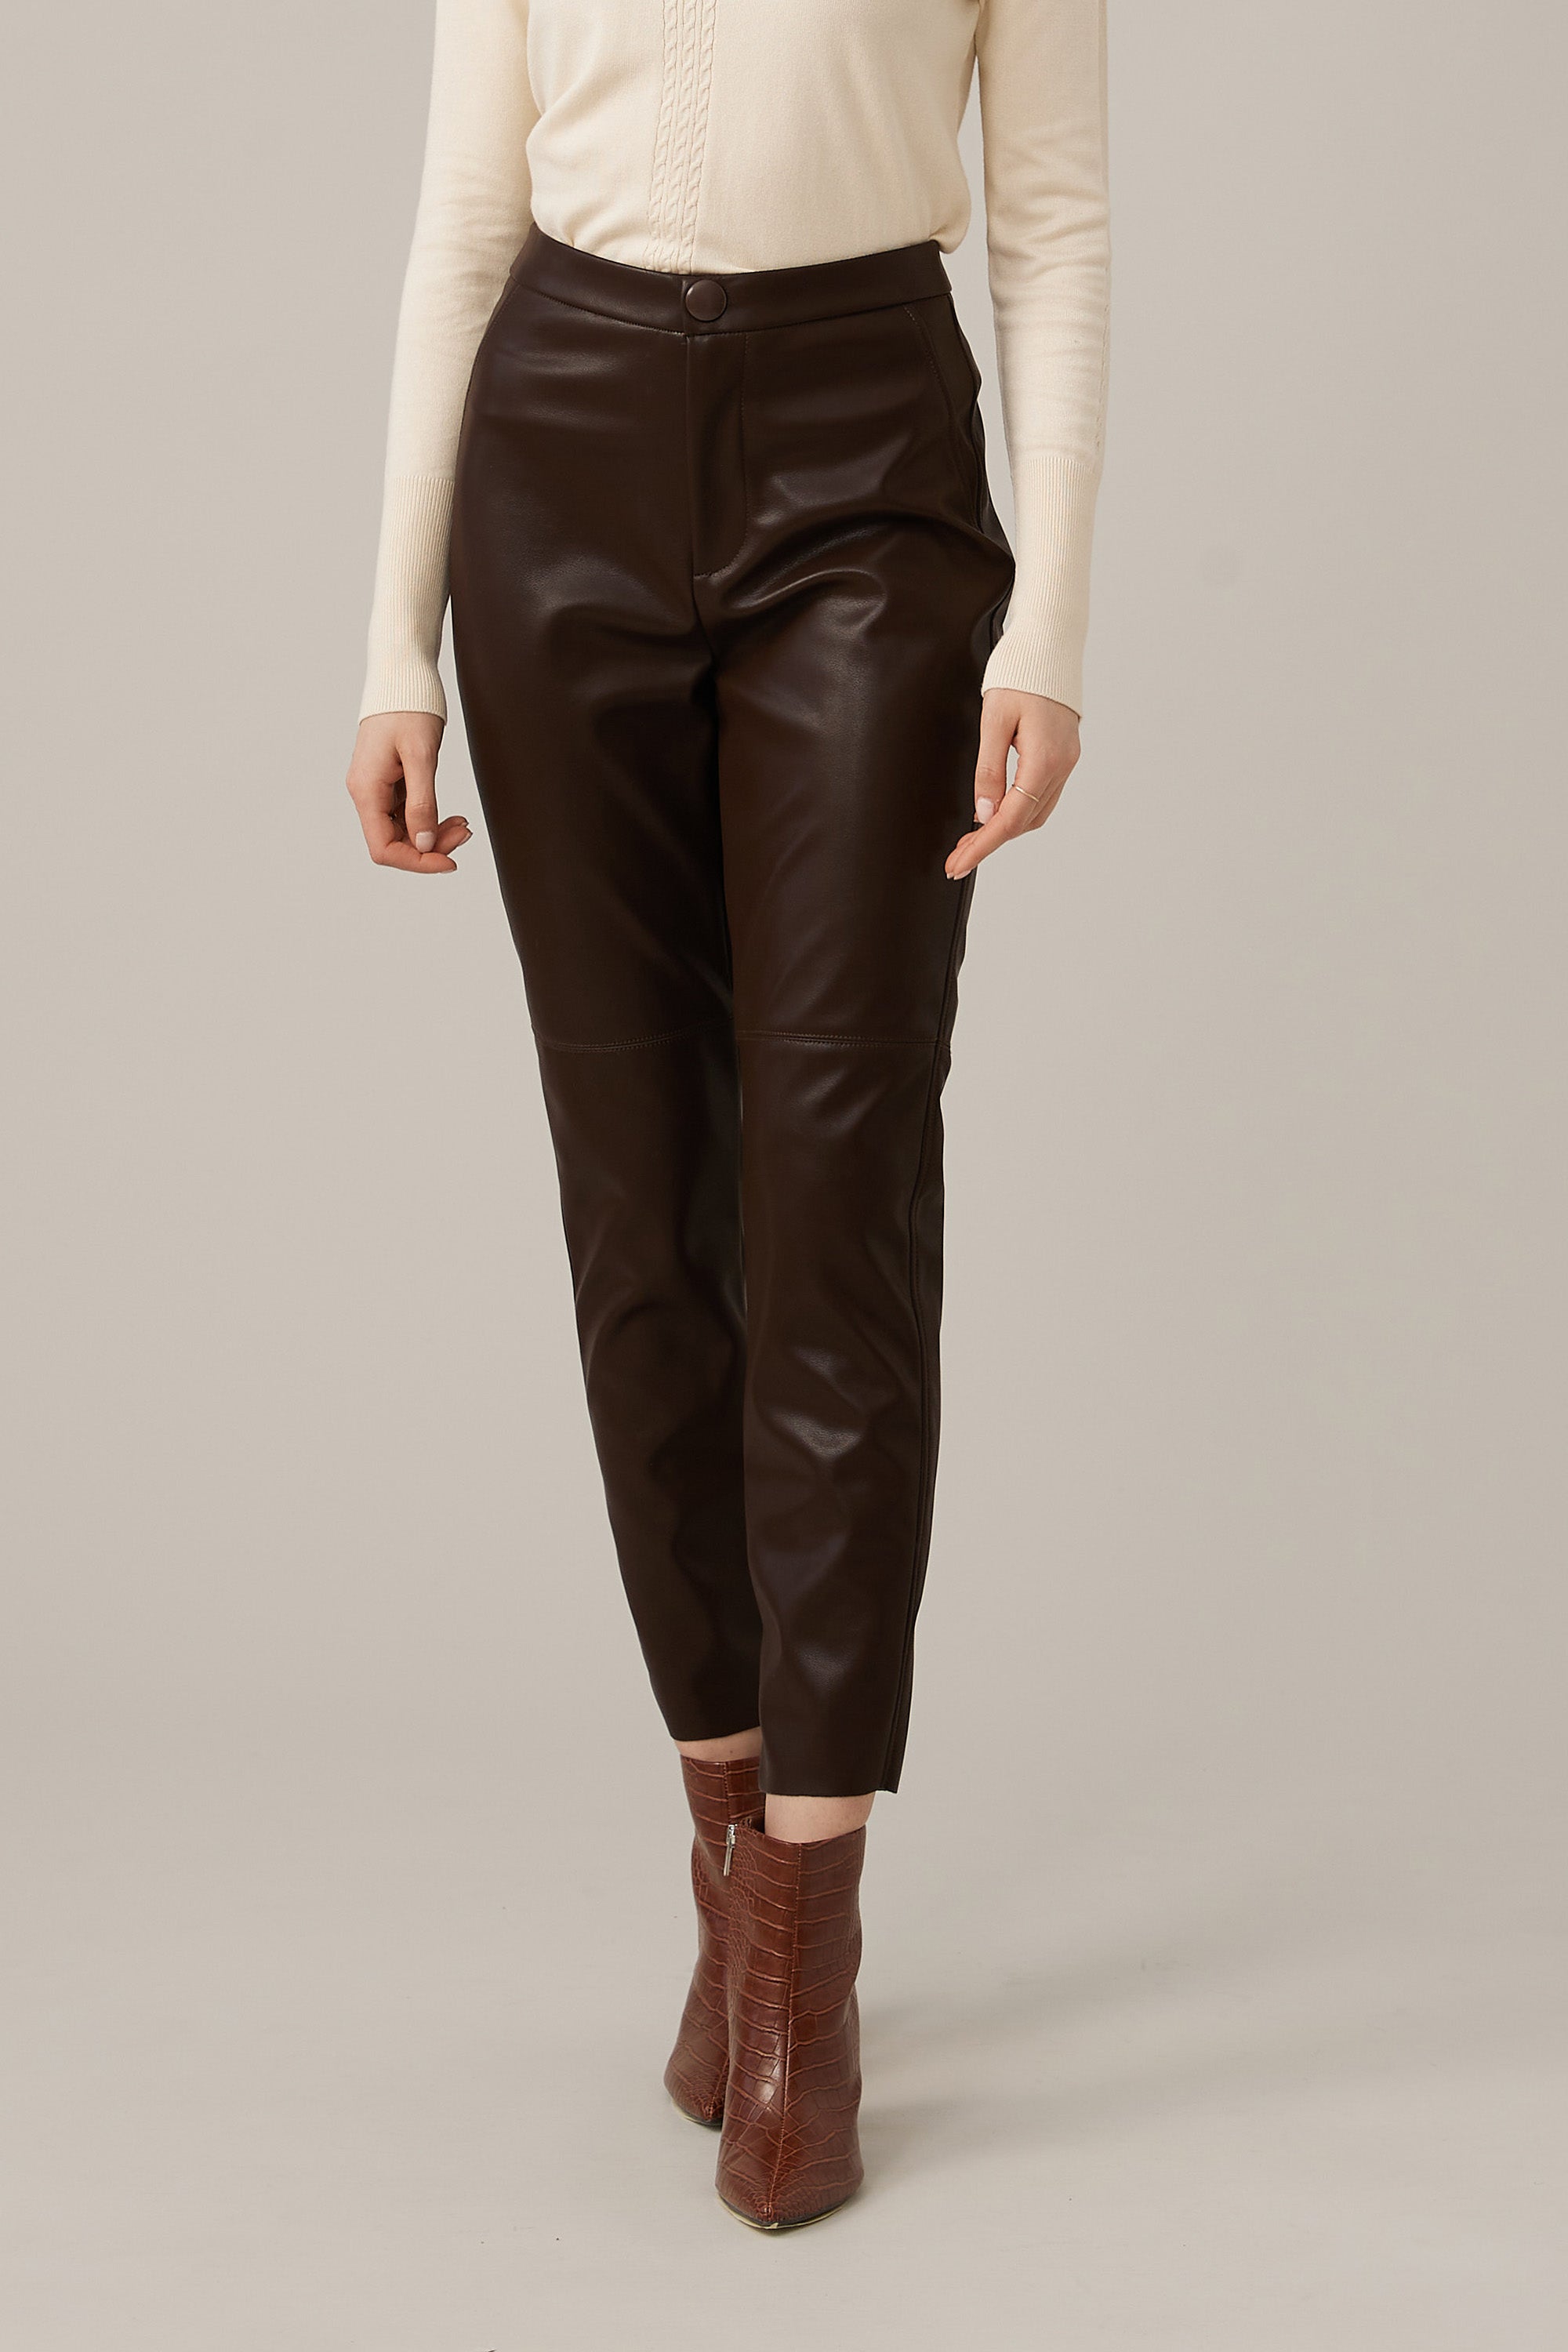 RD STYLE - Blaire Vegan Leather Pant